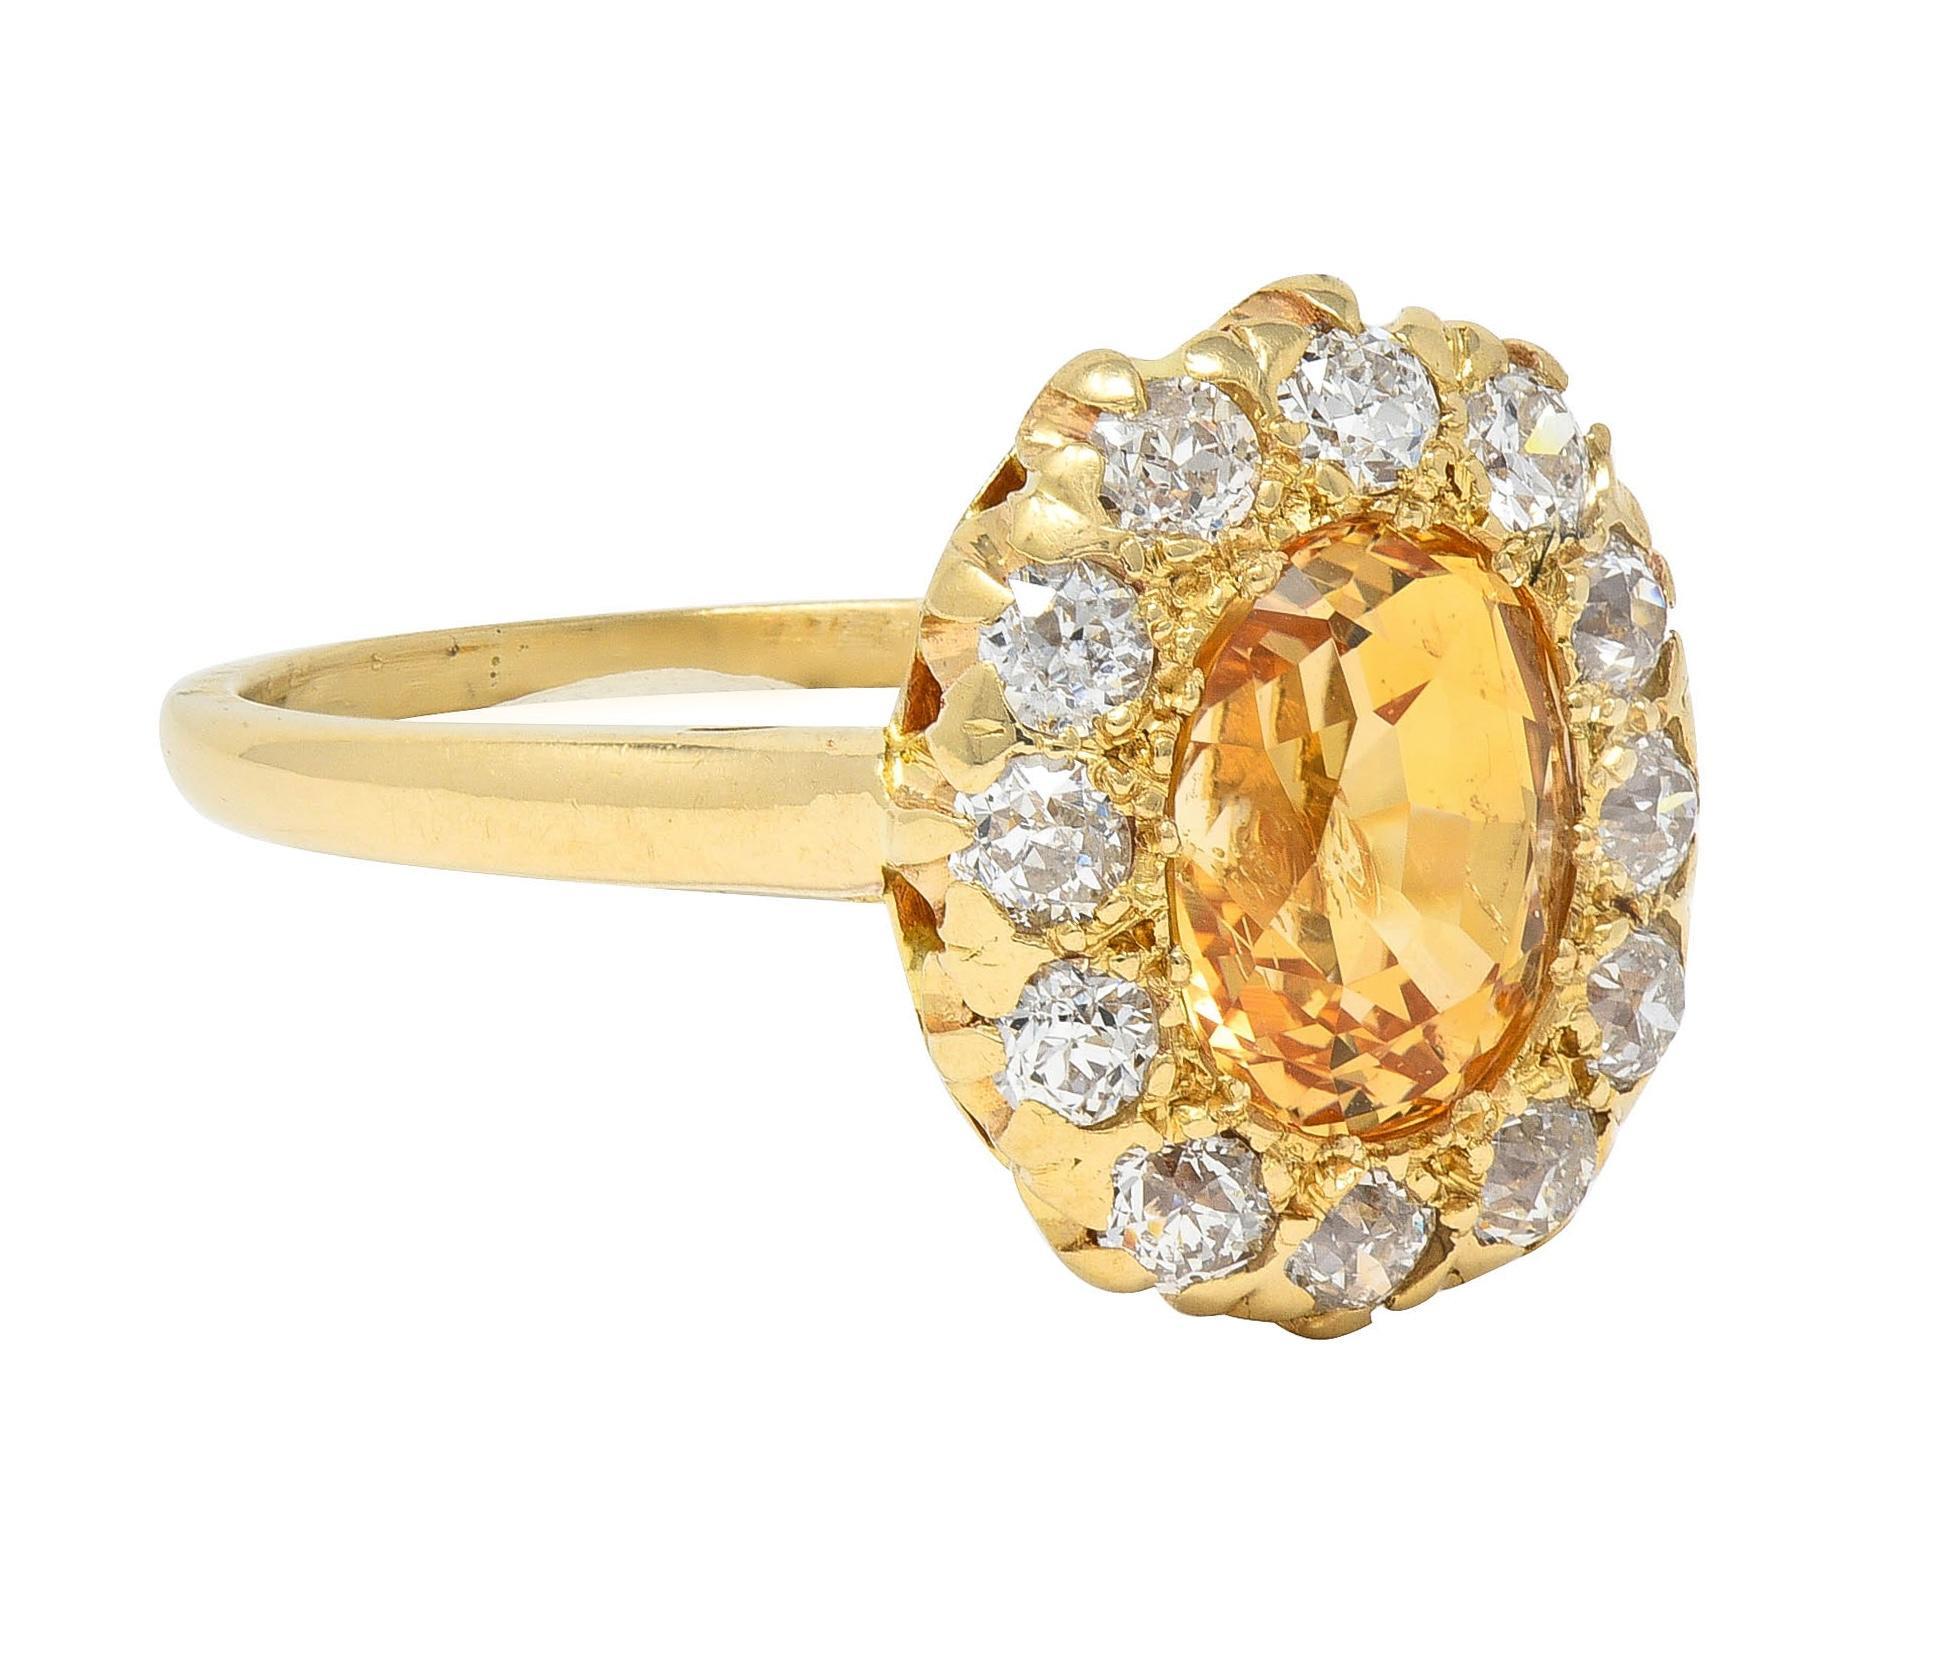 Centering an oval cut sapphire weighing approximately 2.49 carats 
Transparent medium orangey yellow in color - bead set 
With a halo surround of old European cut diamonds
Weighing approximately 0.72 carat total 
G/H color with SI1 clarity - prong